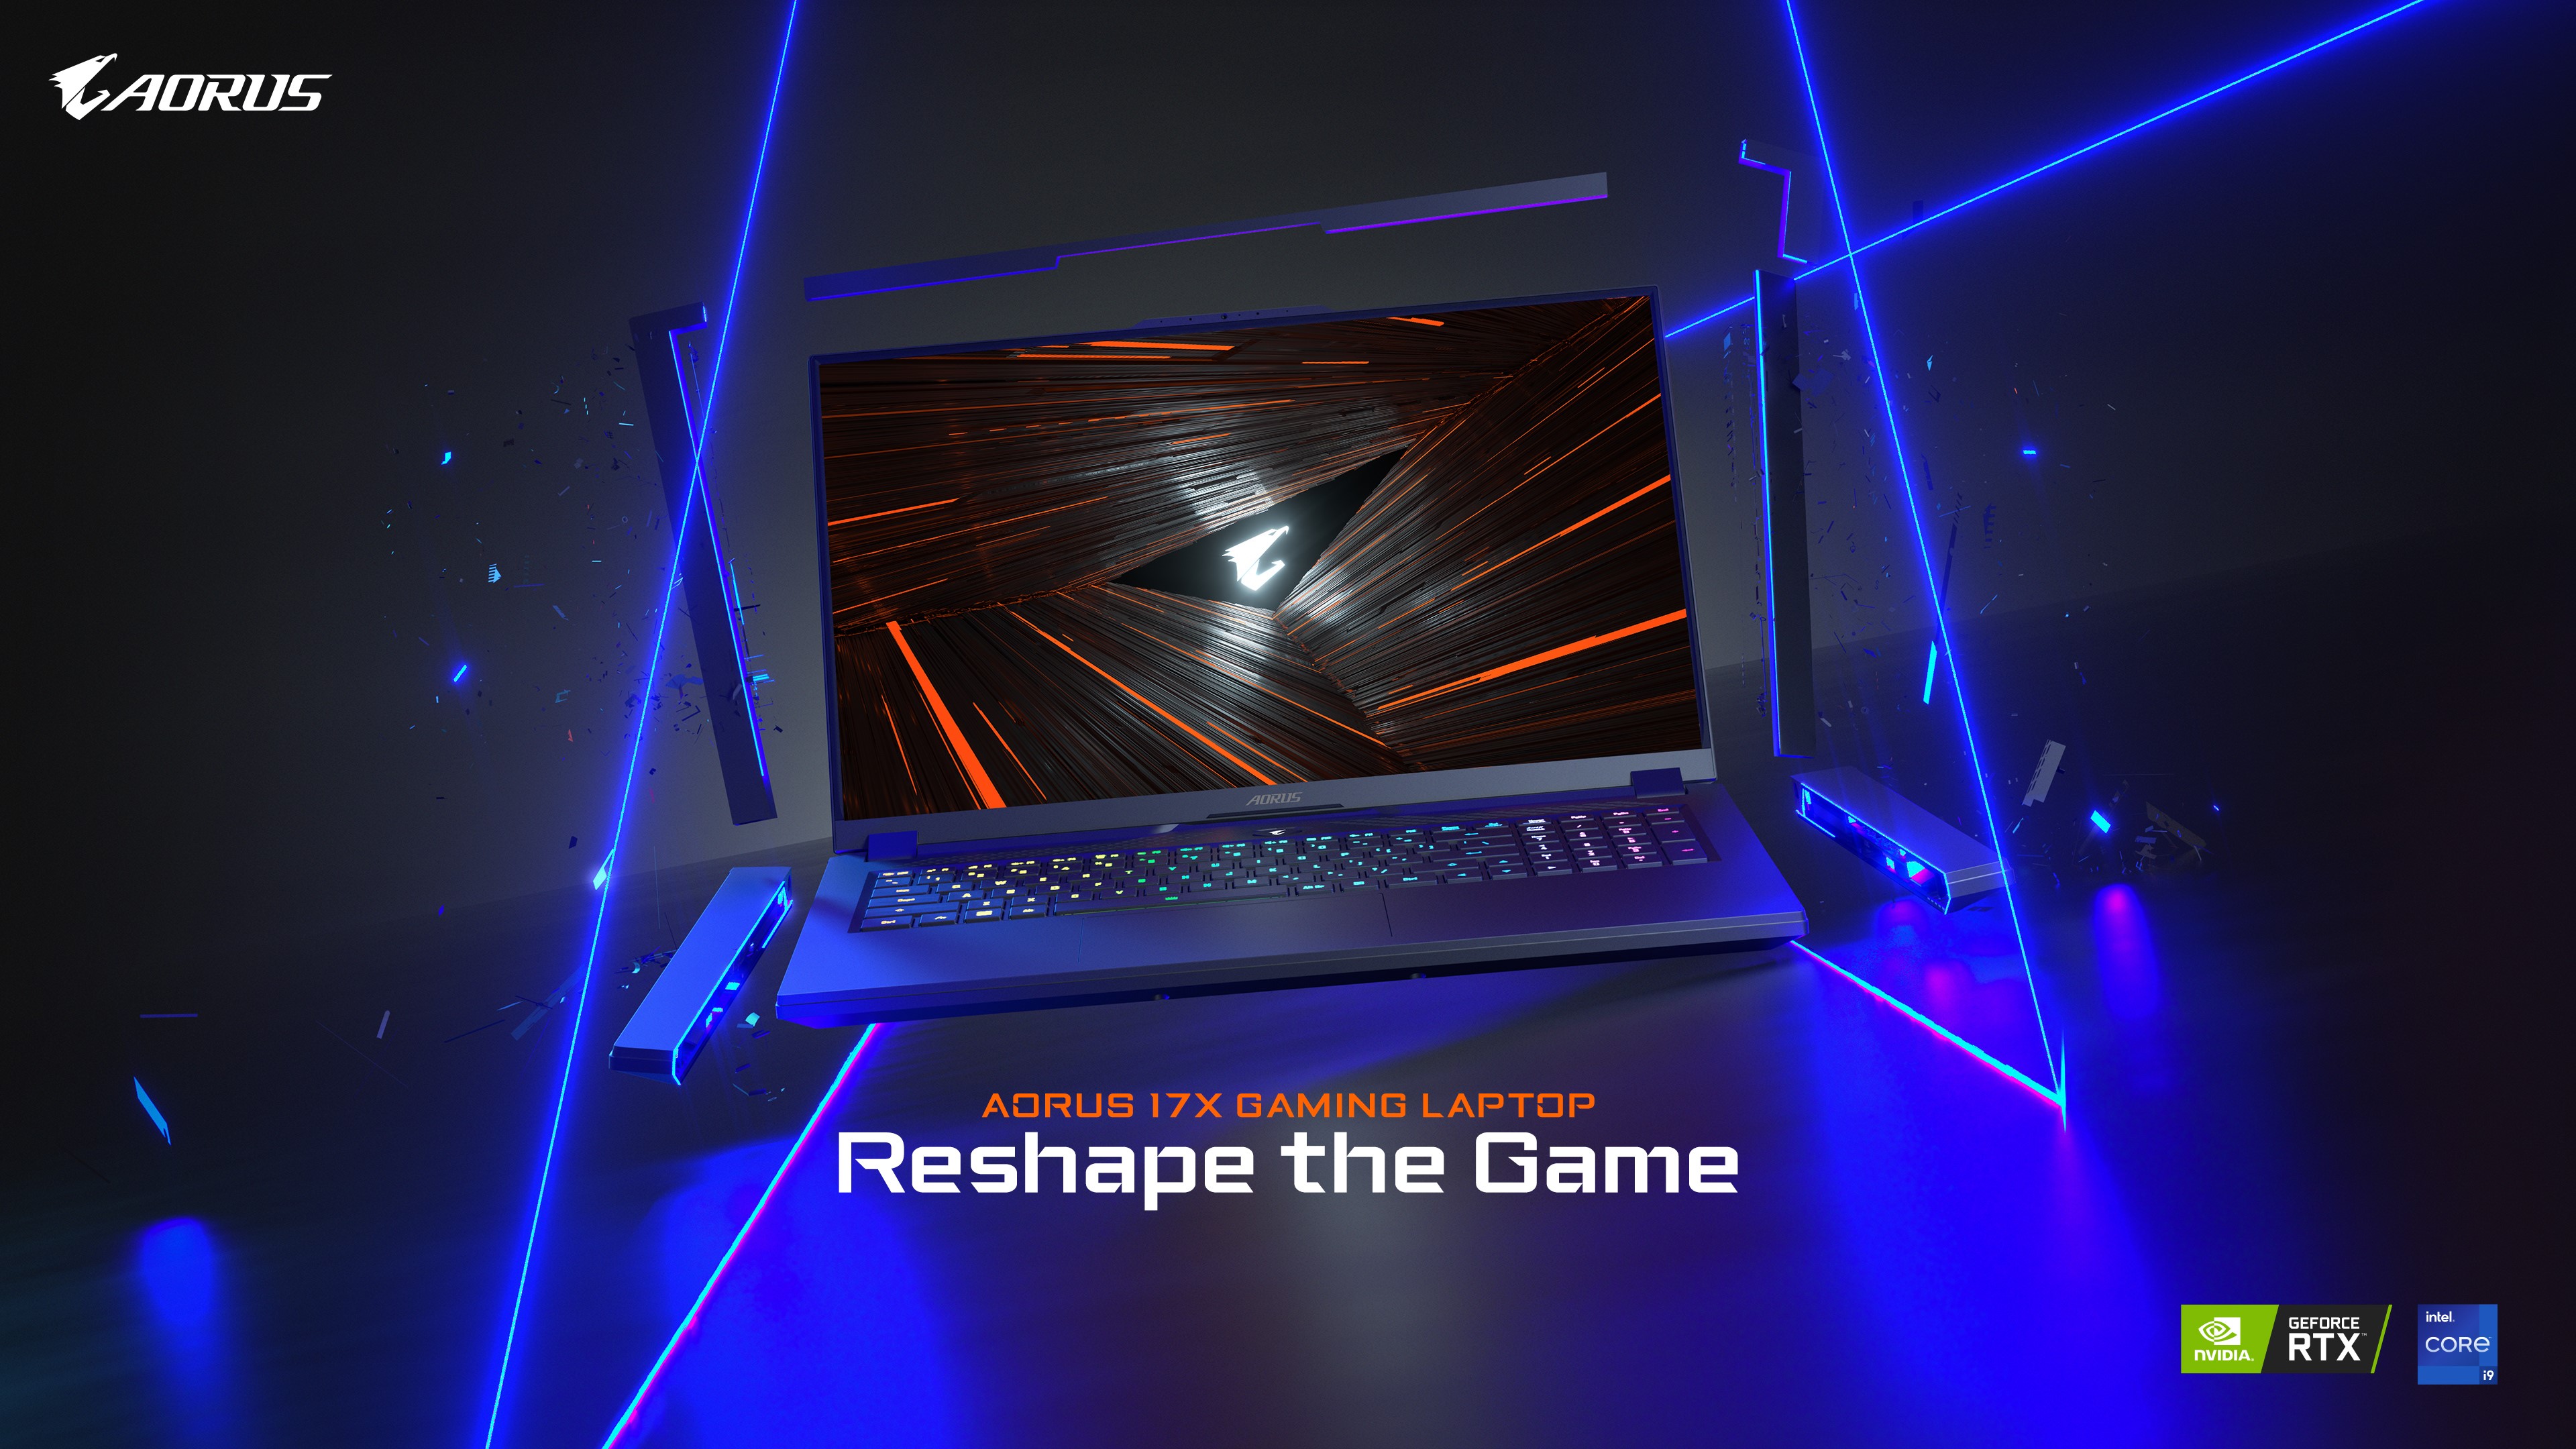 The Emperor of Gaming, AORUS 17X Comes with Groundbreaking Intel i9 HX Extreme Performance